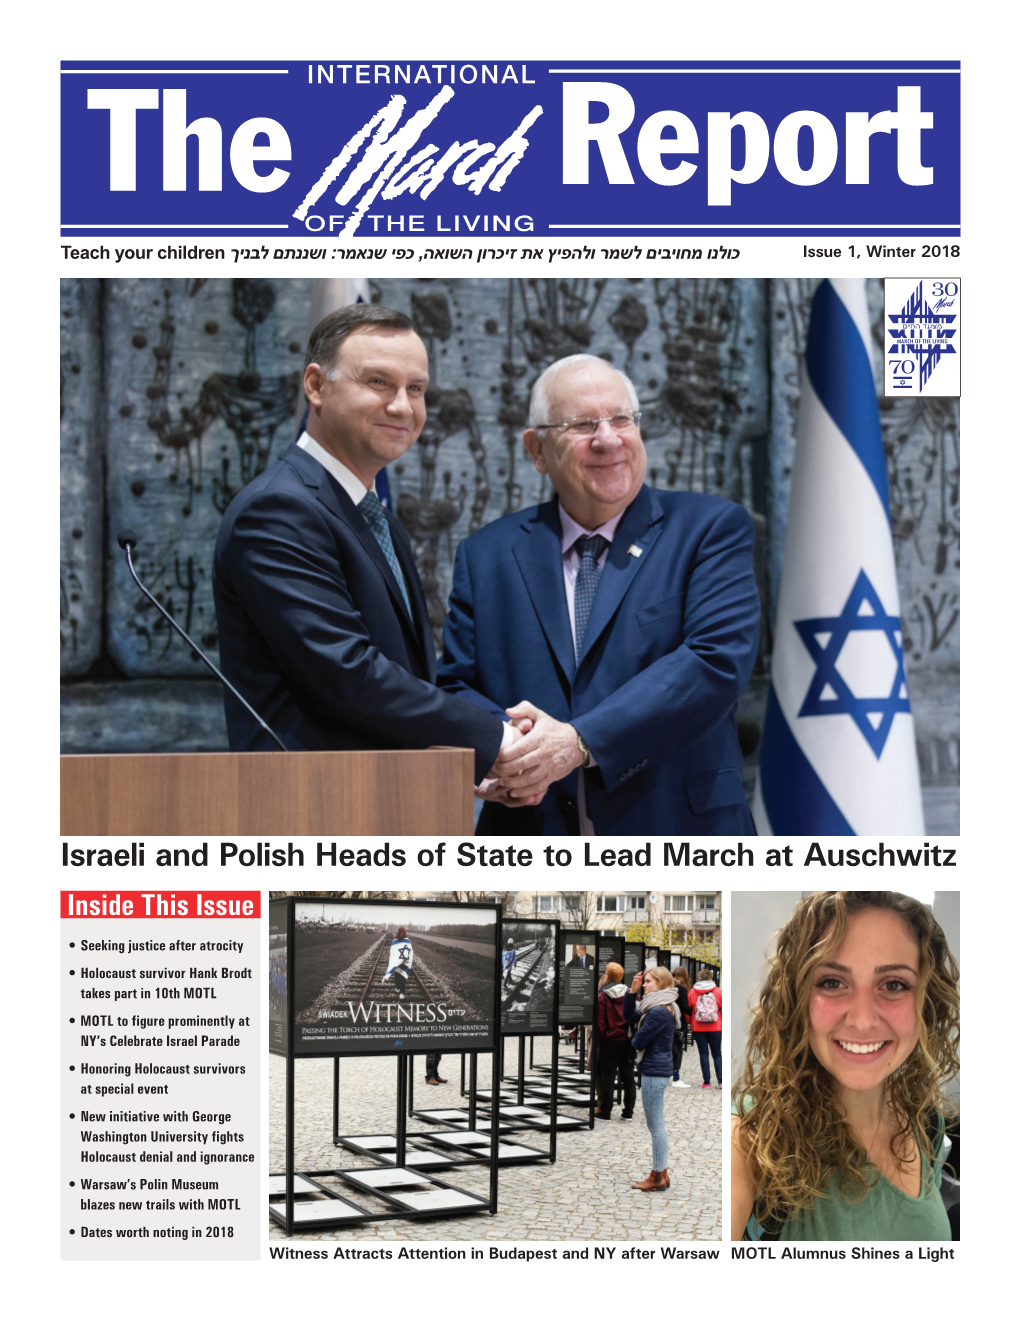 Israeli and Polish Heads of State to Lead March at Auschwitz Inside This Issue